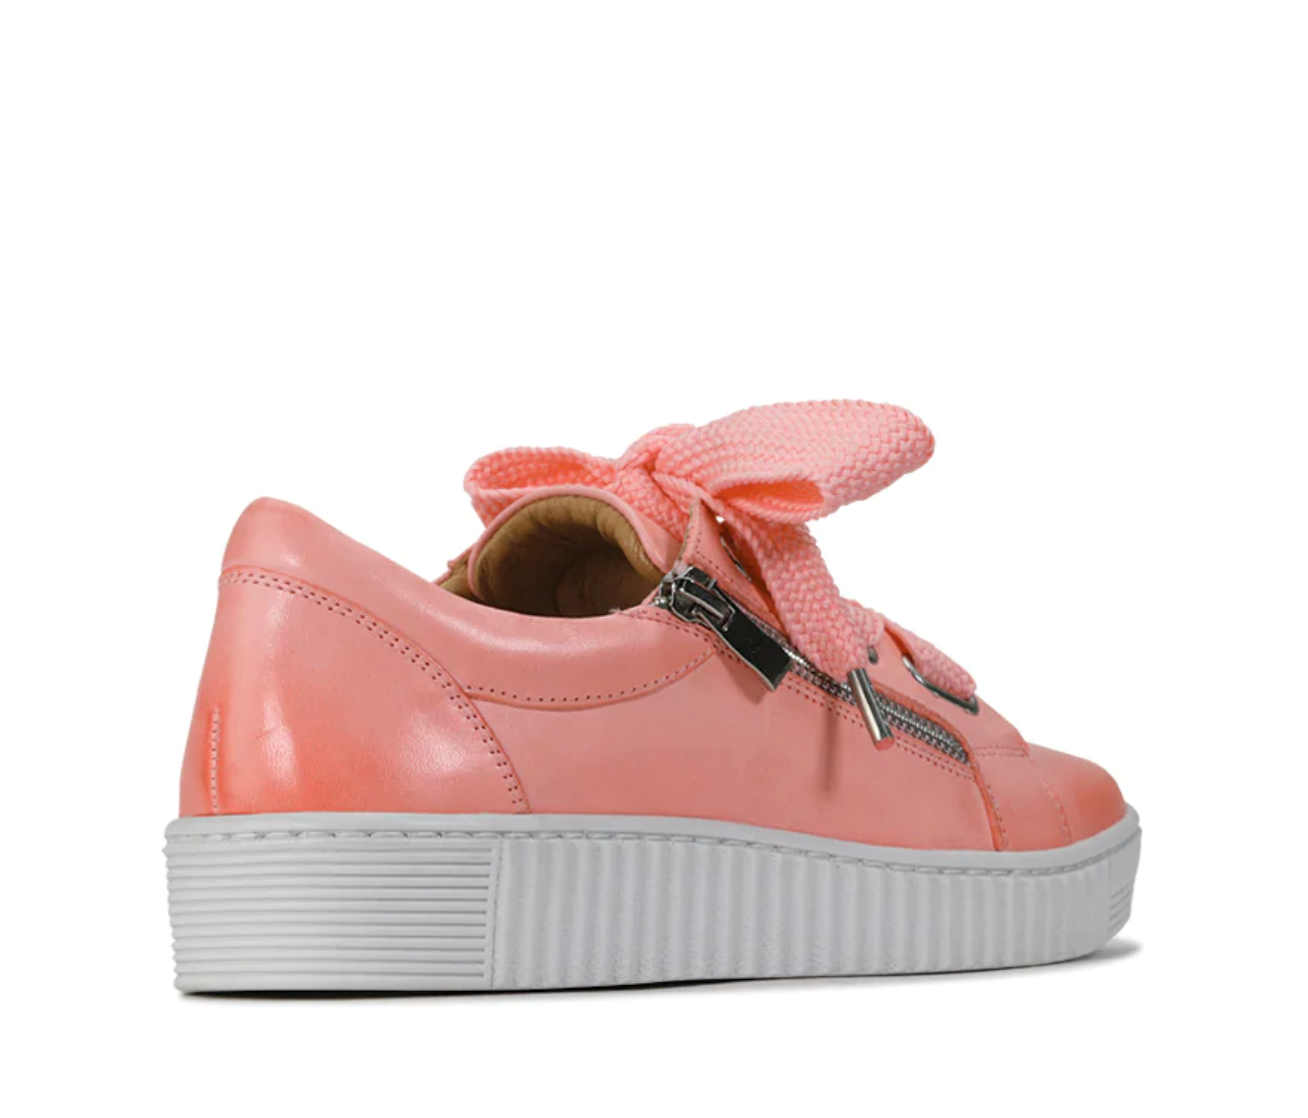 EOS JOVI PINK - Women sneakers - Collective Shoes 